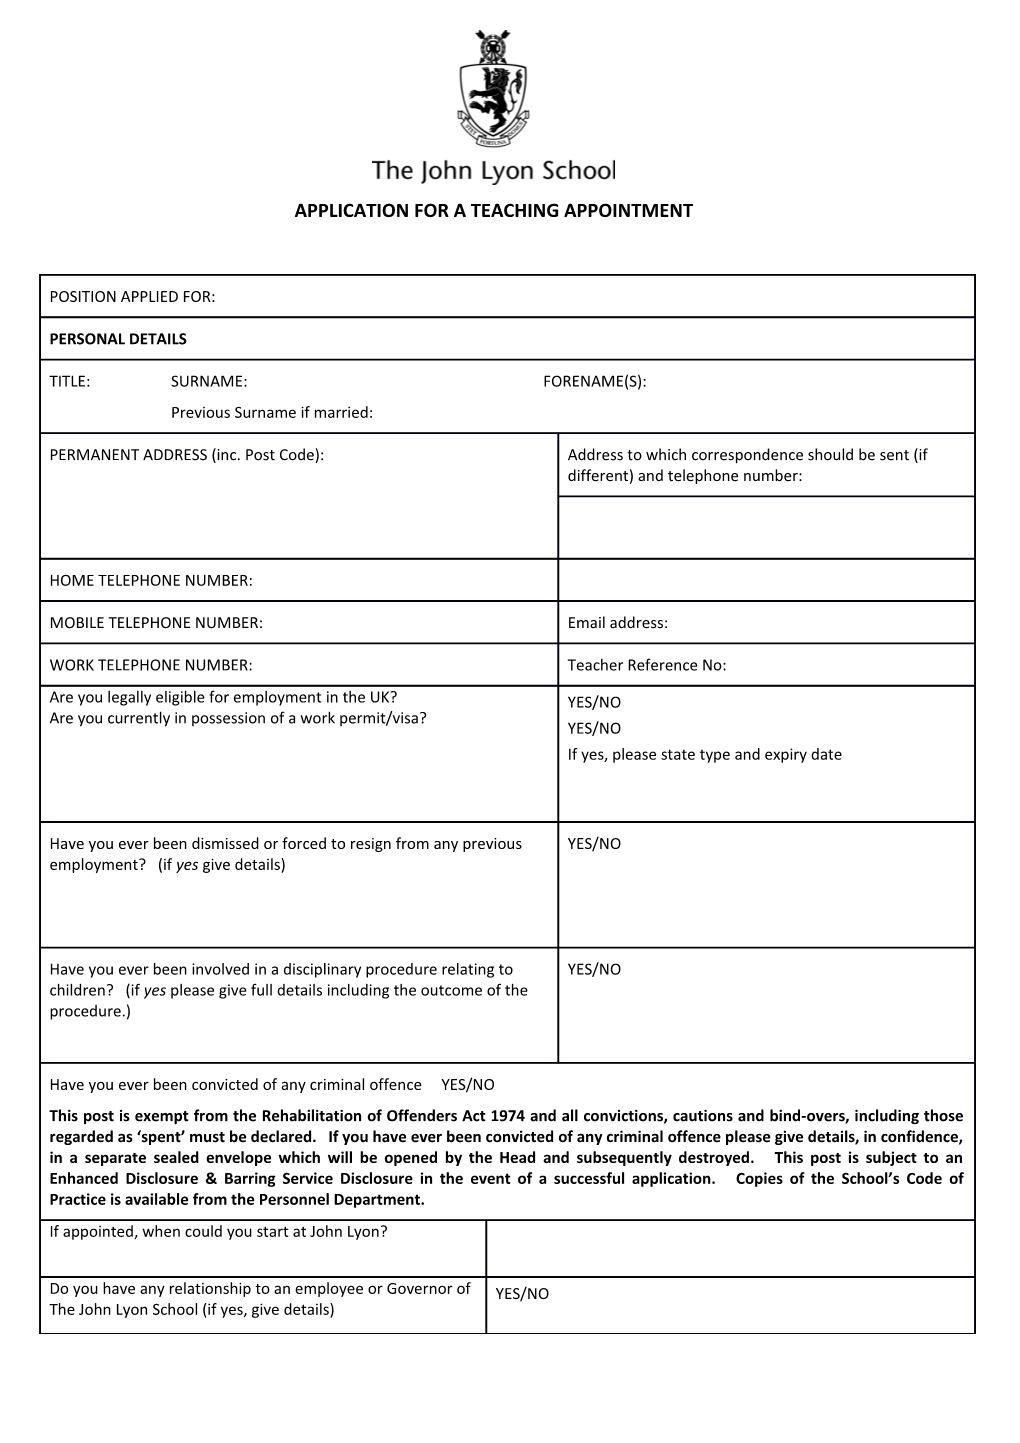 Application for a Teaching Appointment